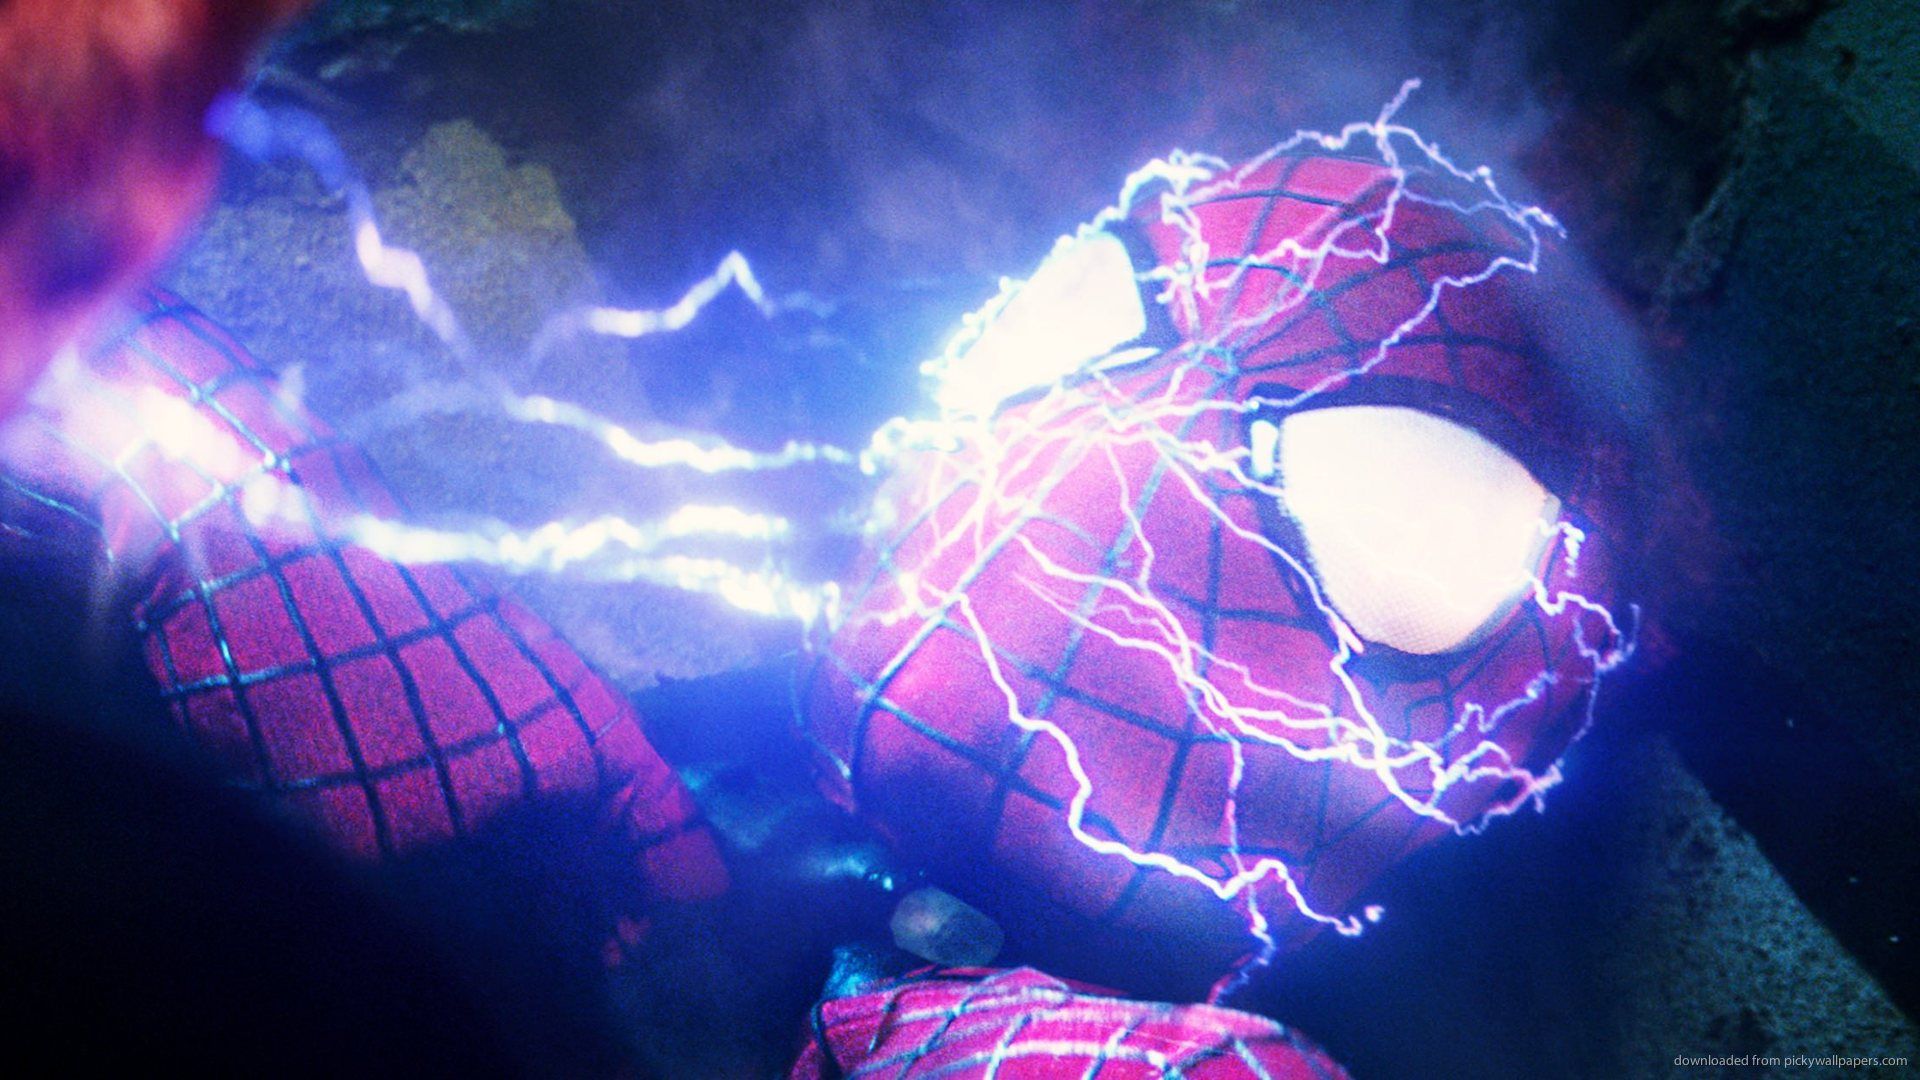 Download 1920x1080 The Amazing Spider-Man 2 Spidey Being Smothered ...